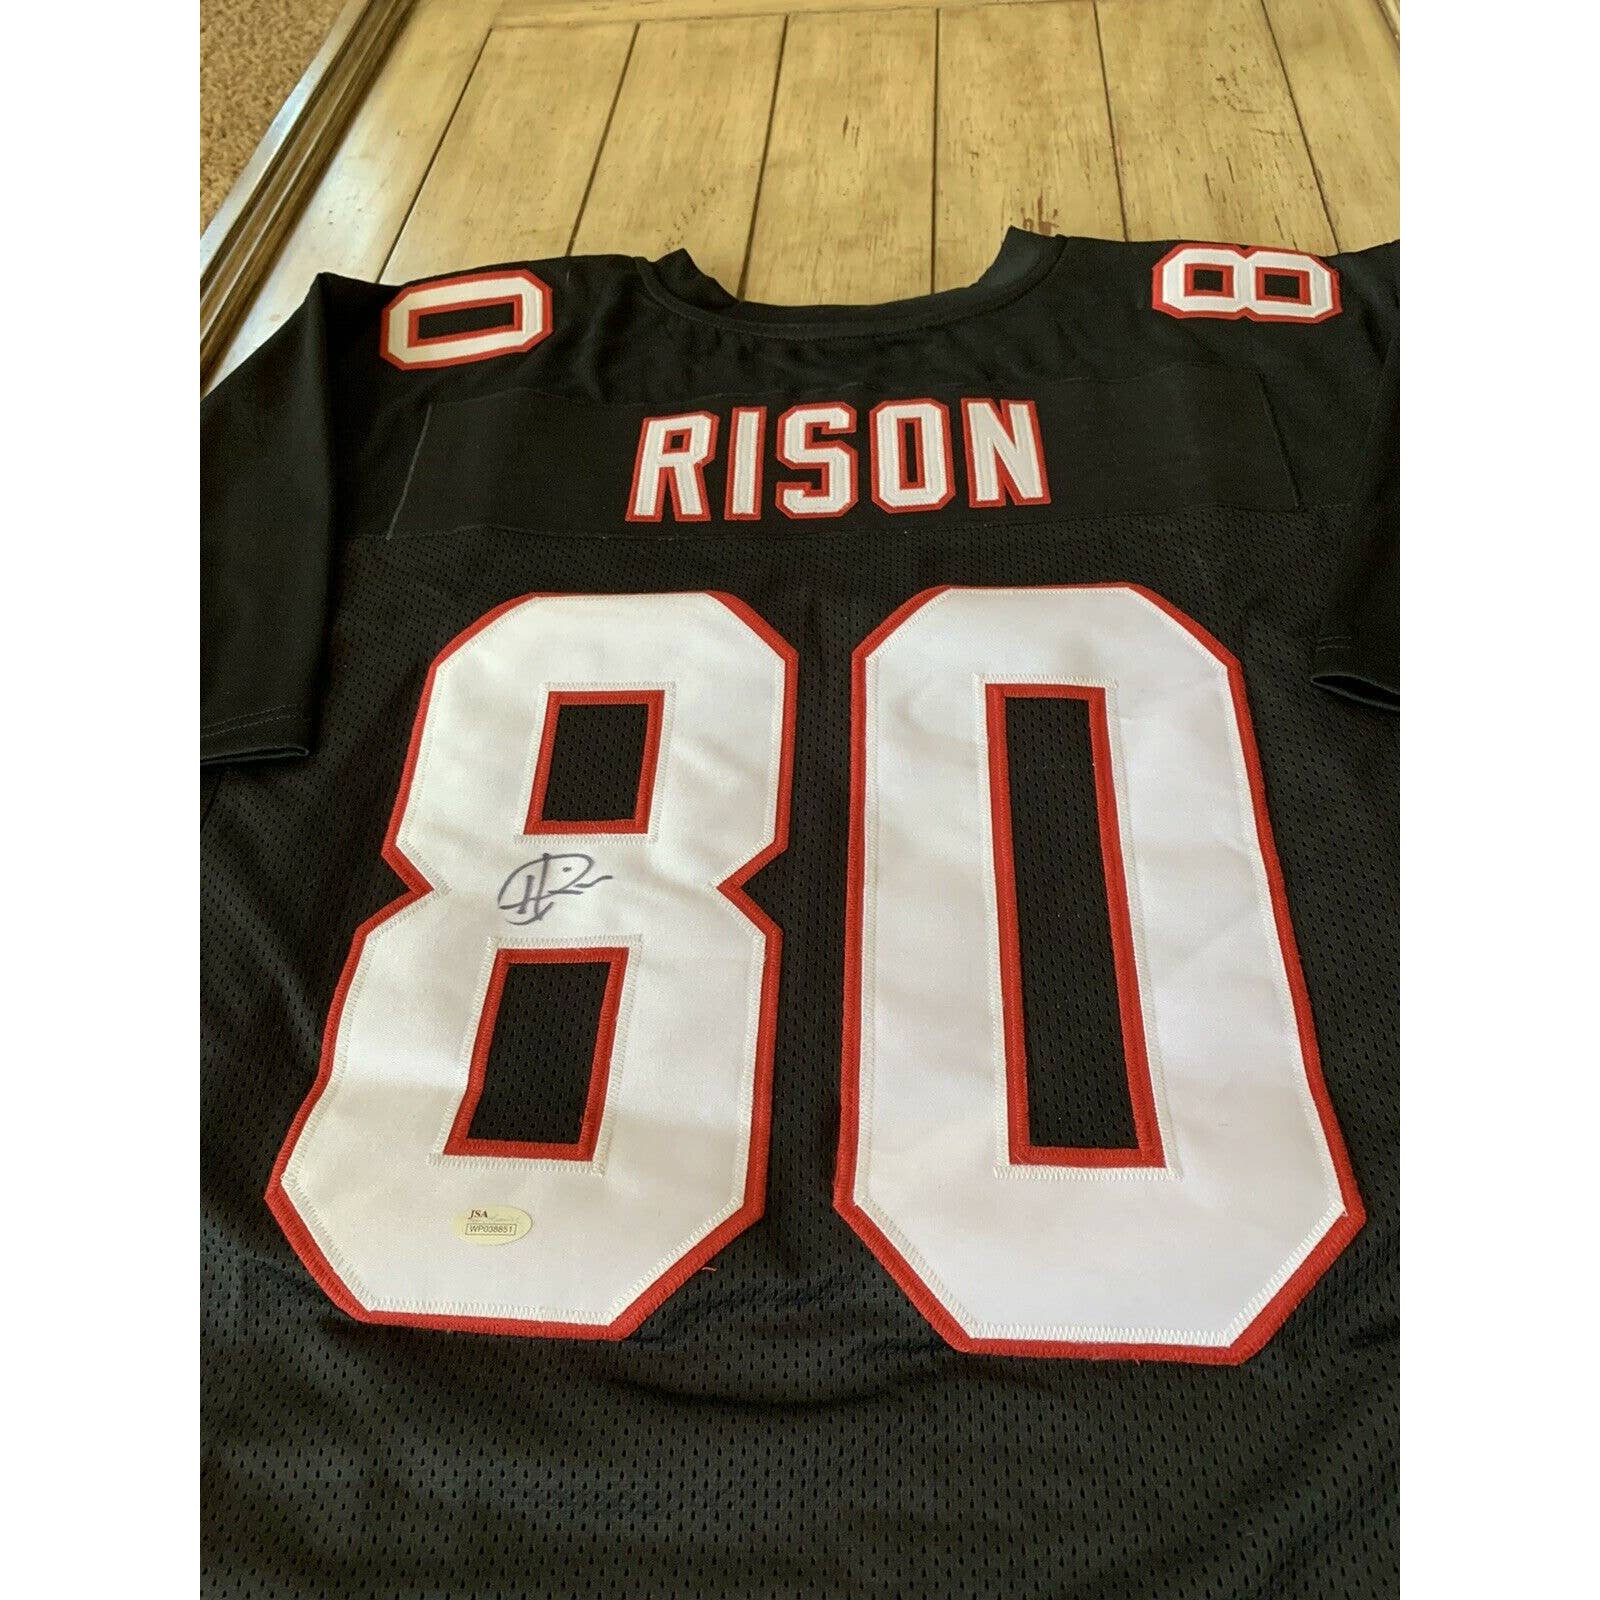 Andre Rison Autographed/Signed Jersey Atlanta Falcons - TreasuresEvolved